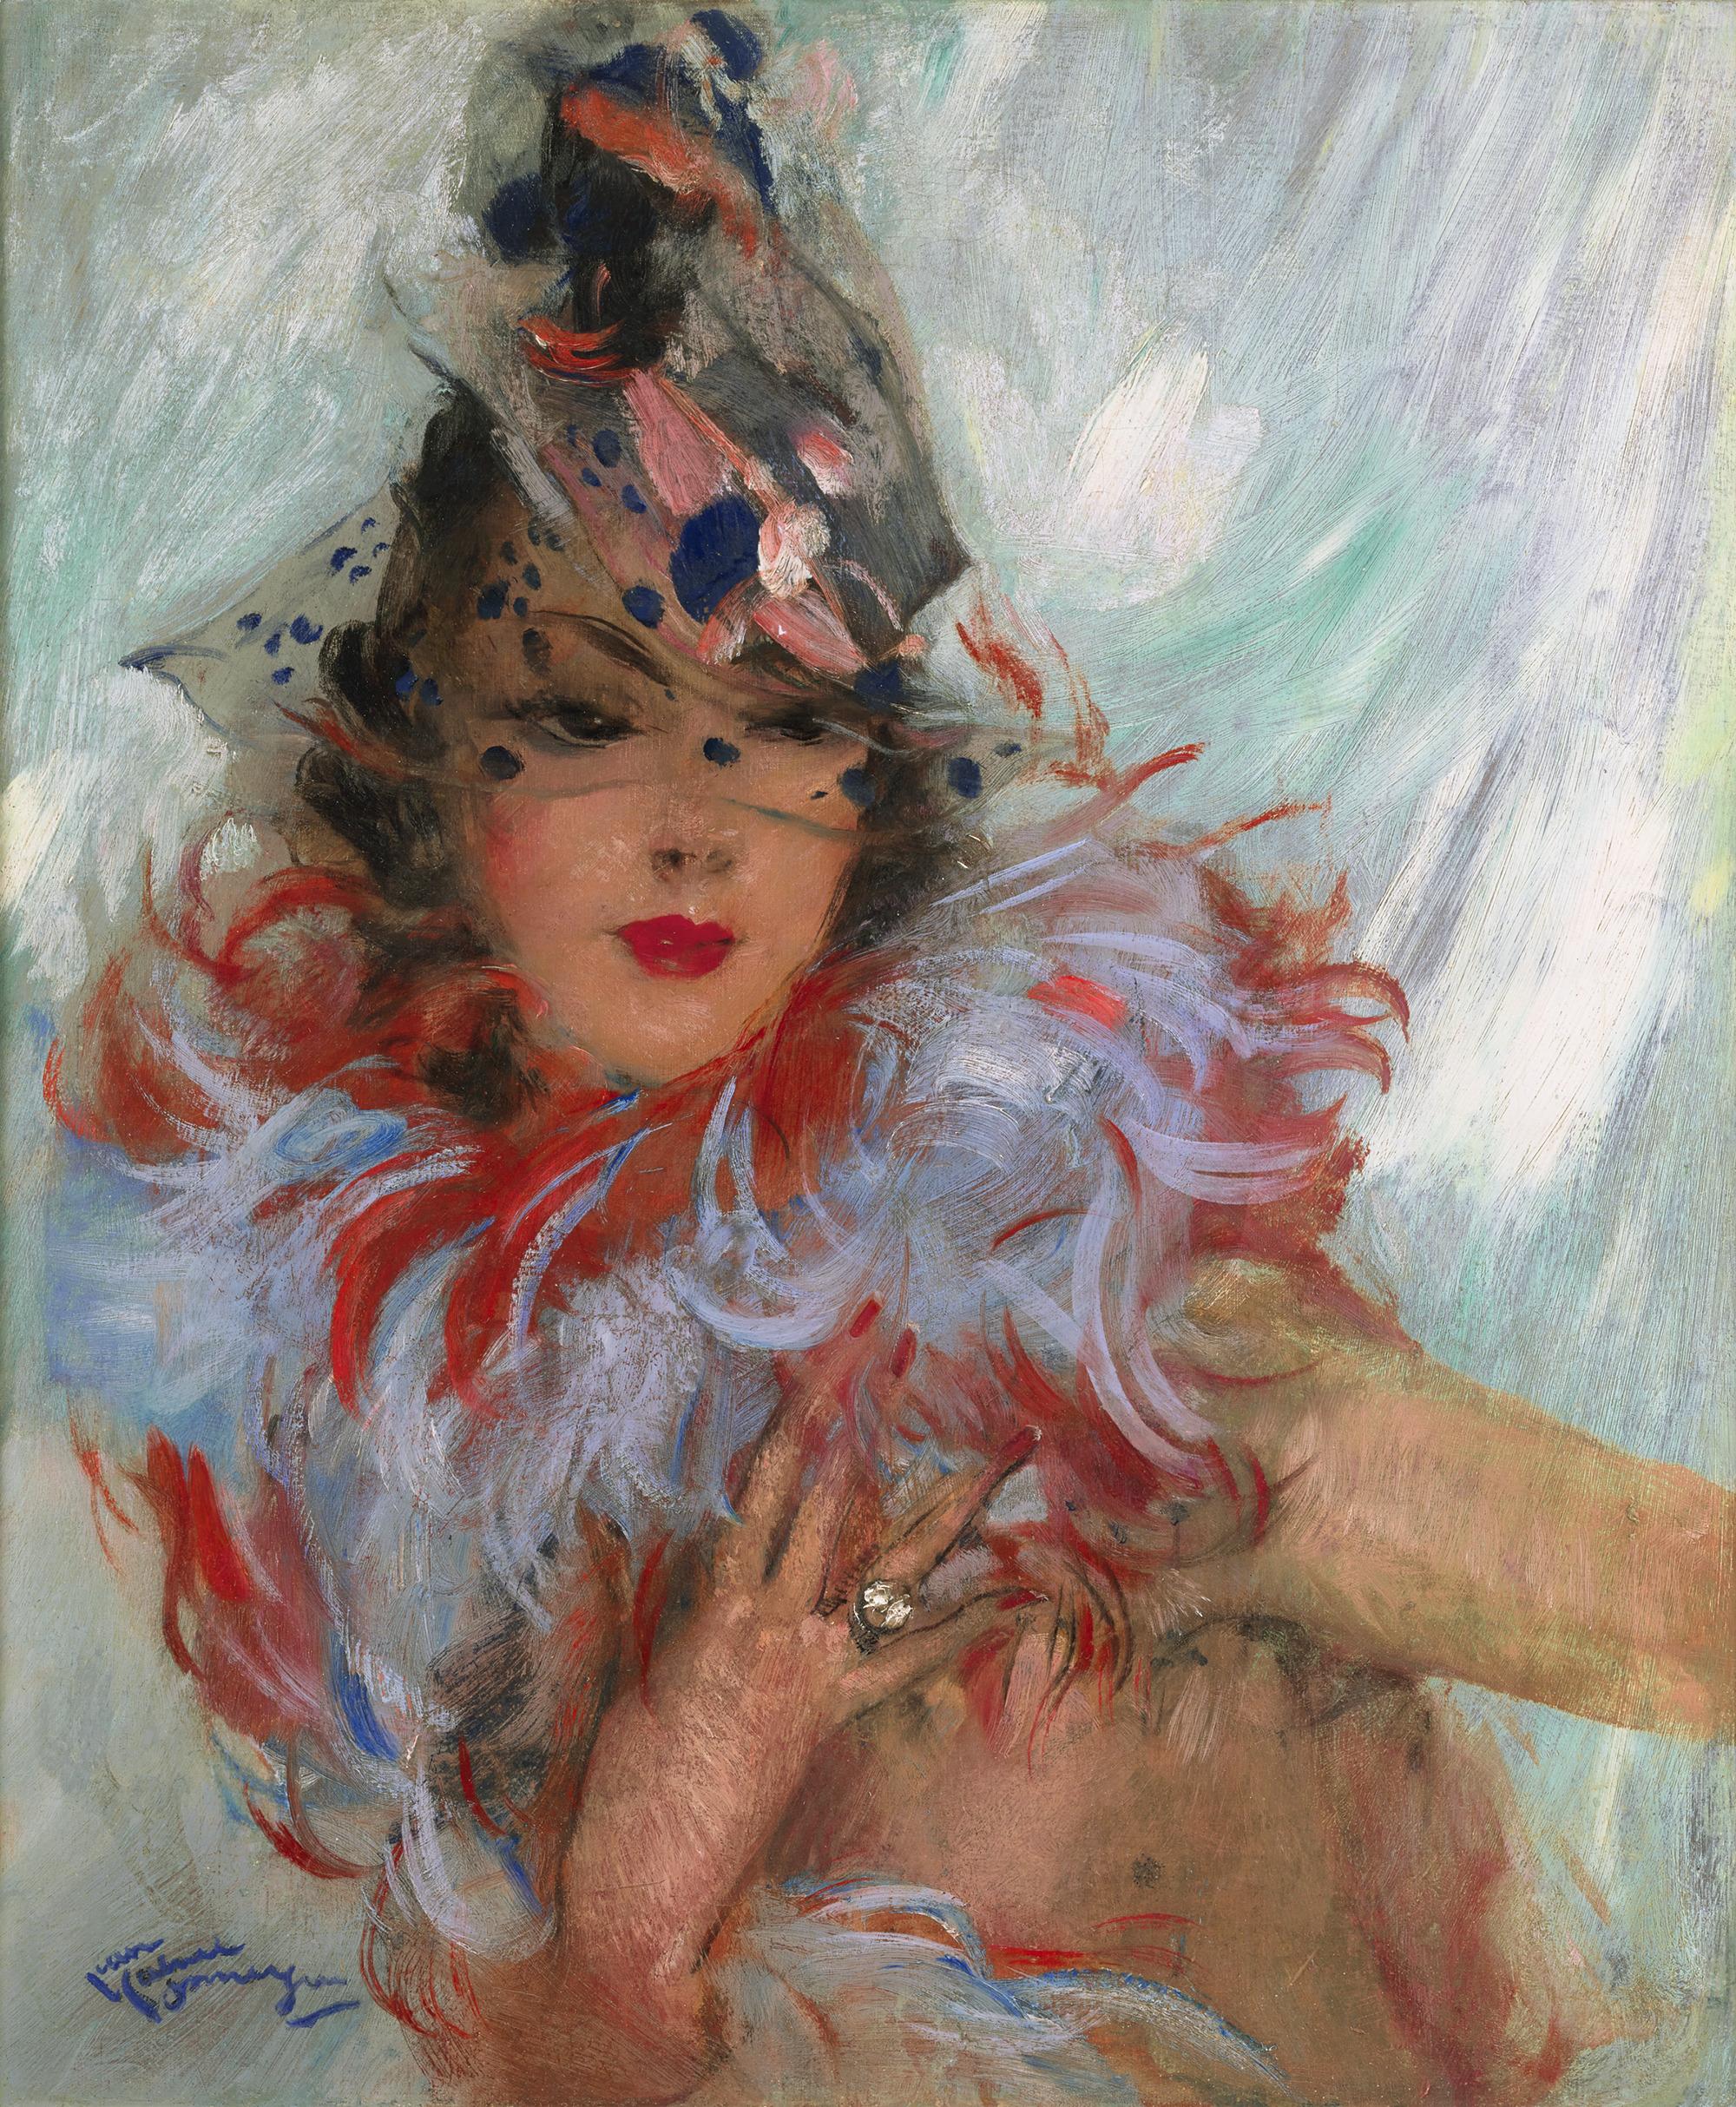 Jean-Gabriel Domergue
1889-1962  French

Beauty in a Boa

Signed "Jean Gabriel Domergue" (lower left)
Oil on canvas

Jean-Gabriel Domergue represents an elegantly seductive woman in this vibrantly hued oil portrait. Depicted with her hair tucked in